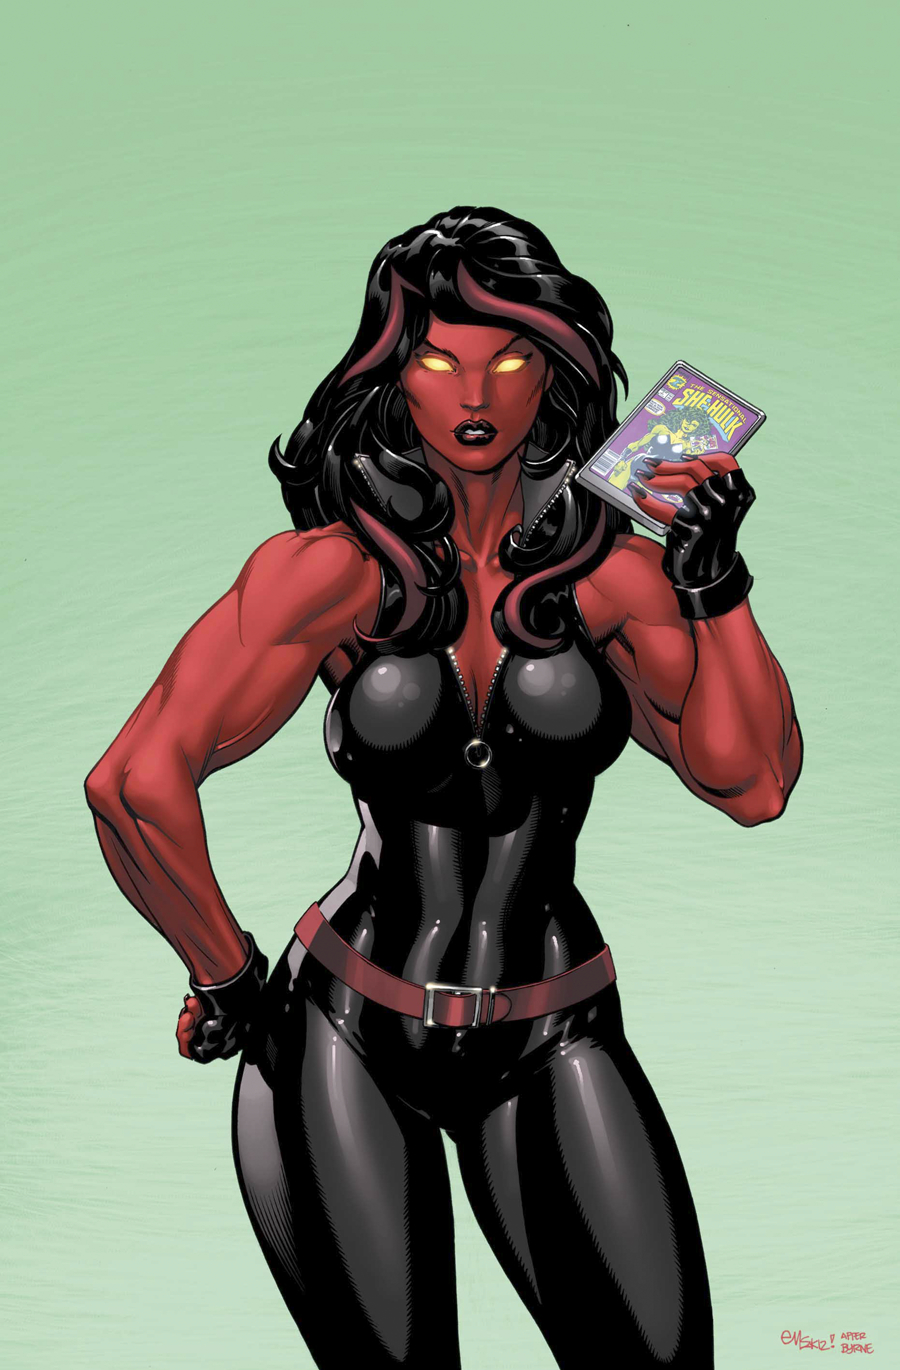 RED SHE-HULK #58 NOW